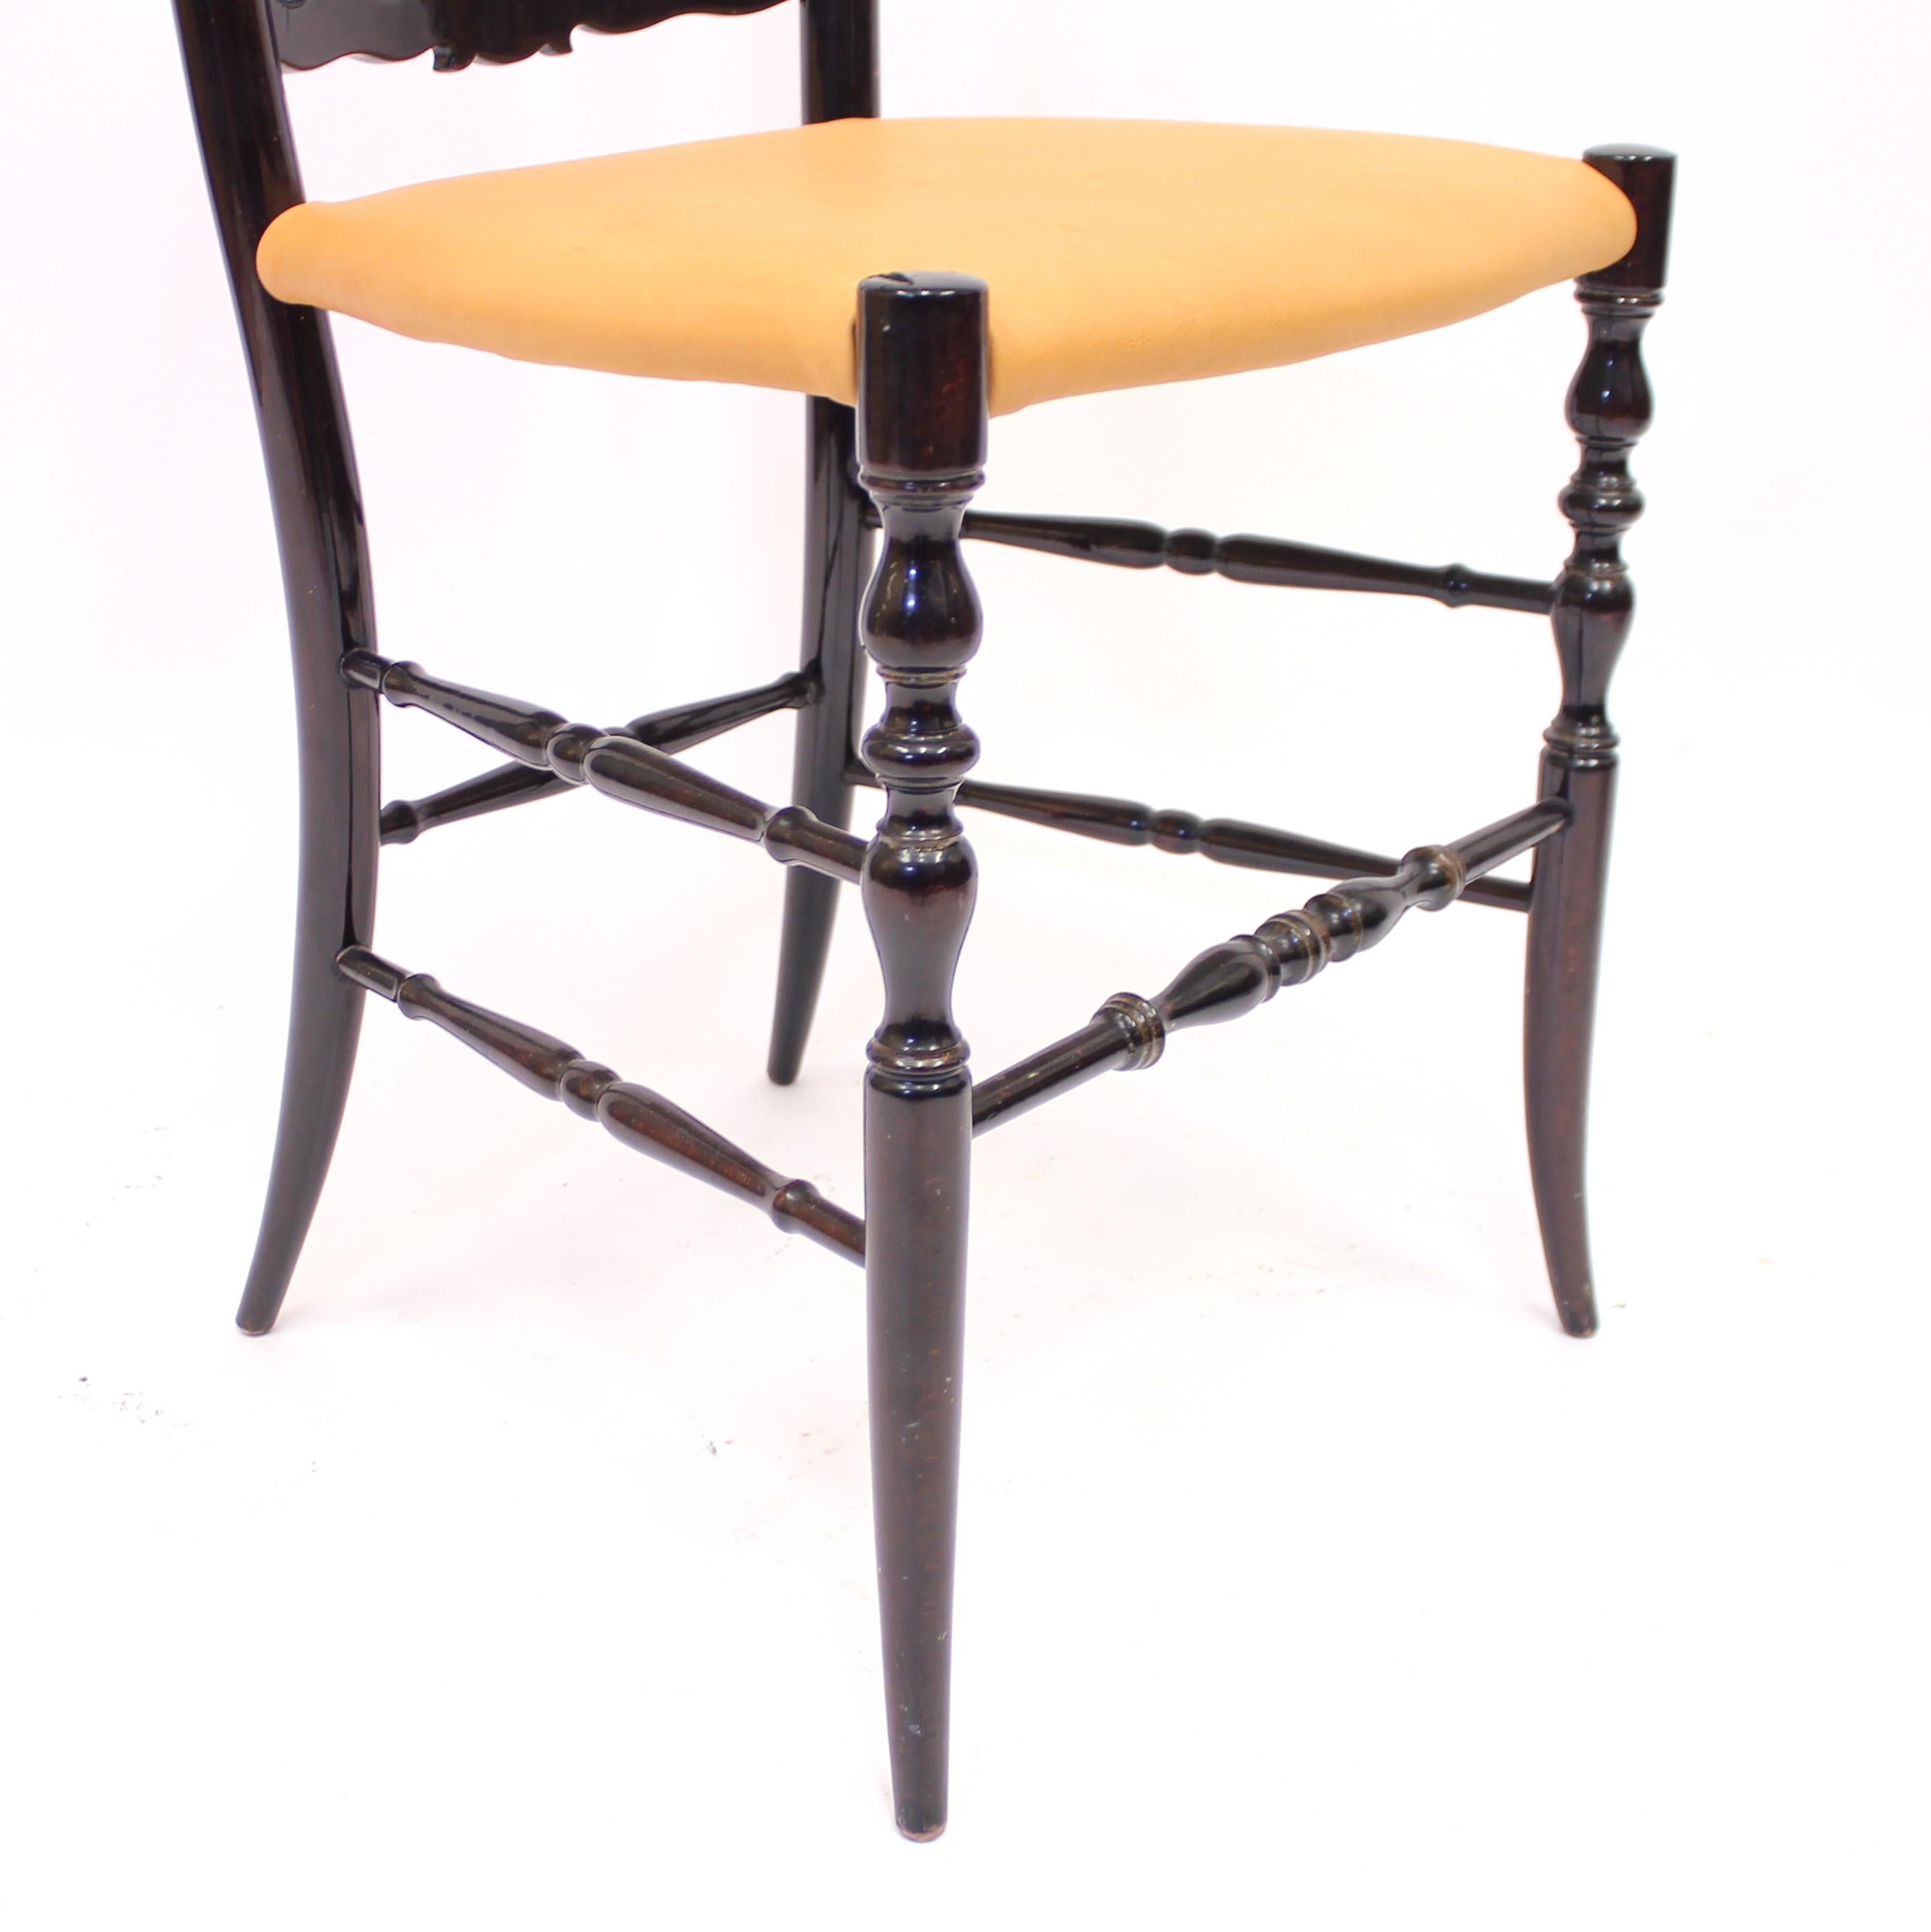 Pair of Vintage Chiavari Chairs with Leather Seats, circa 1950 9